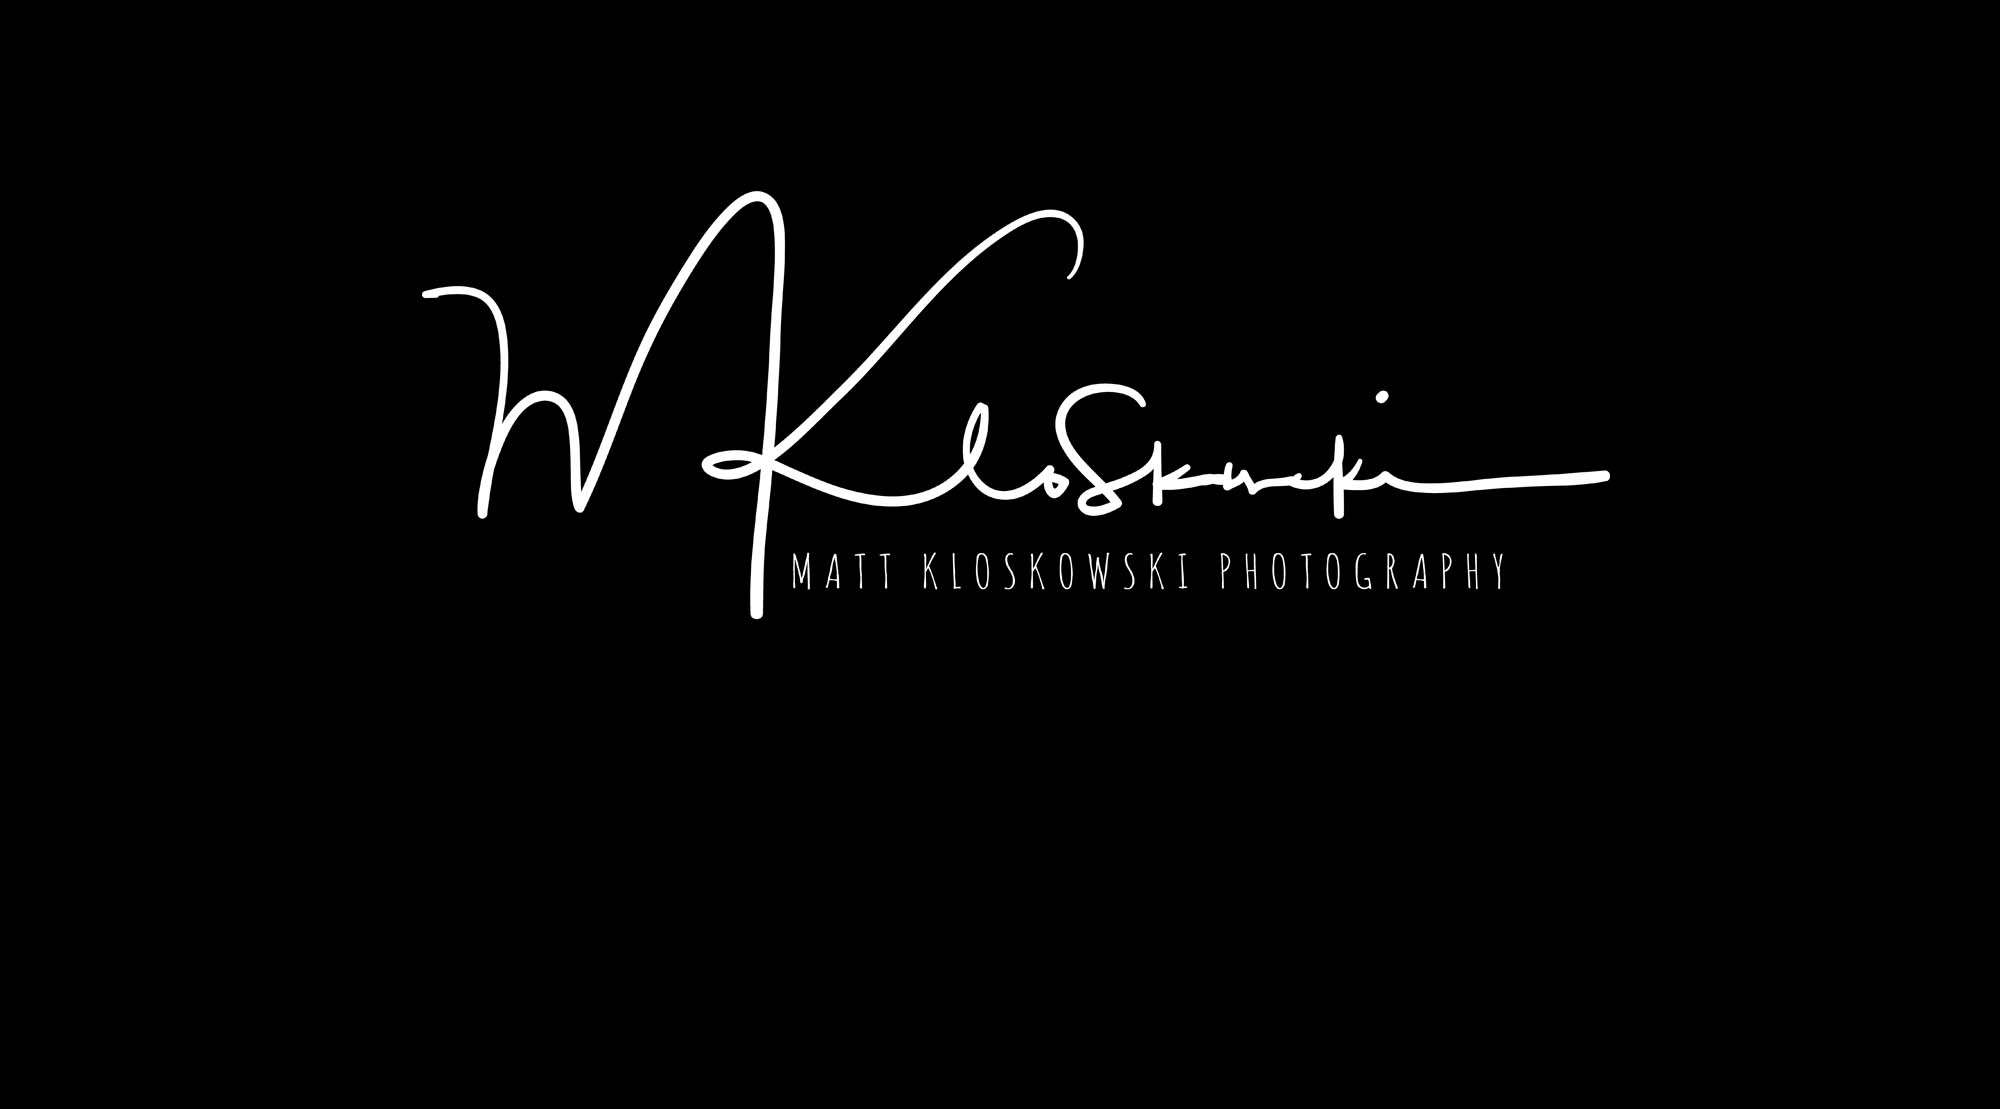 Photography Signature Logo - A New Way to Add Your Signature to a Photo